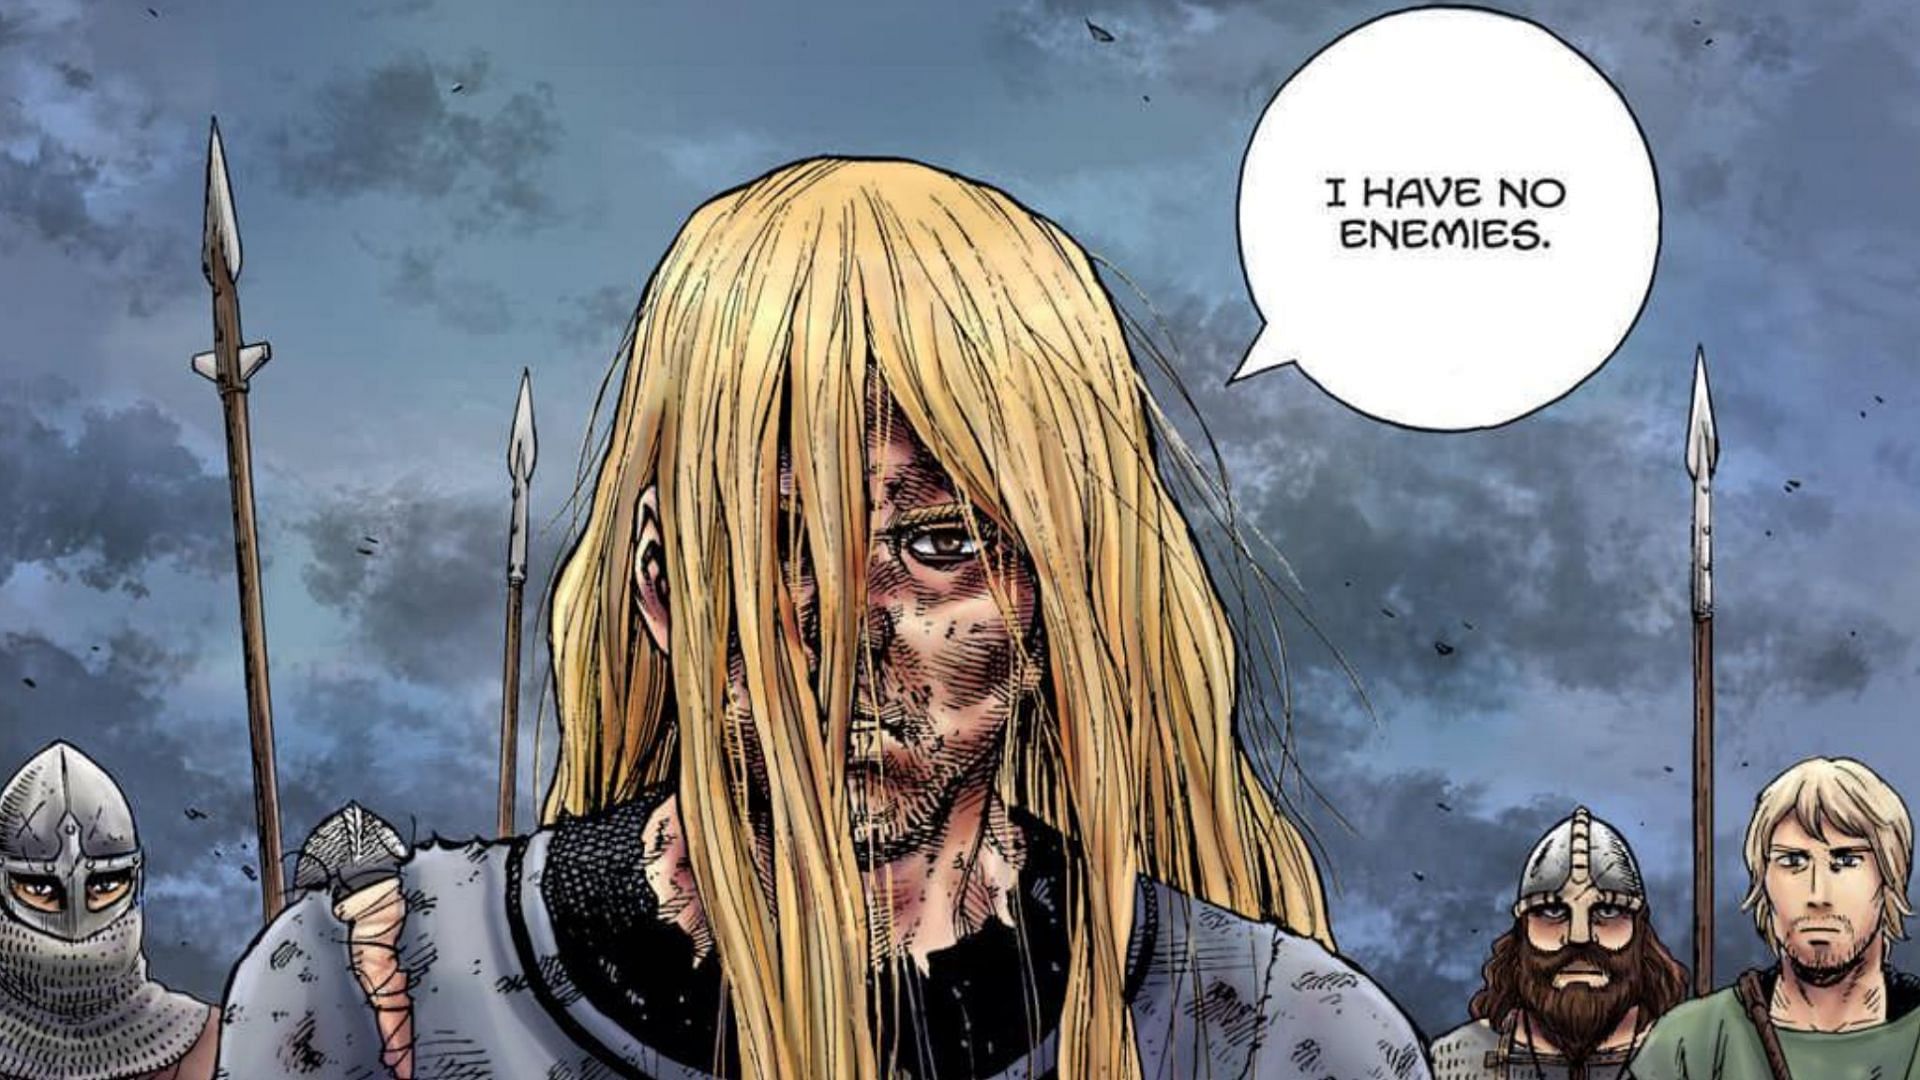 I have no enemies: The Vinland Saga quote that went viral, explained